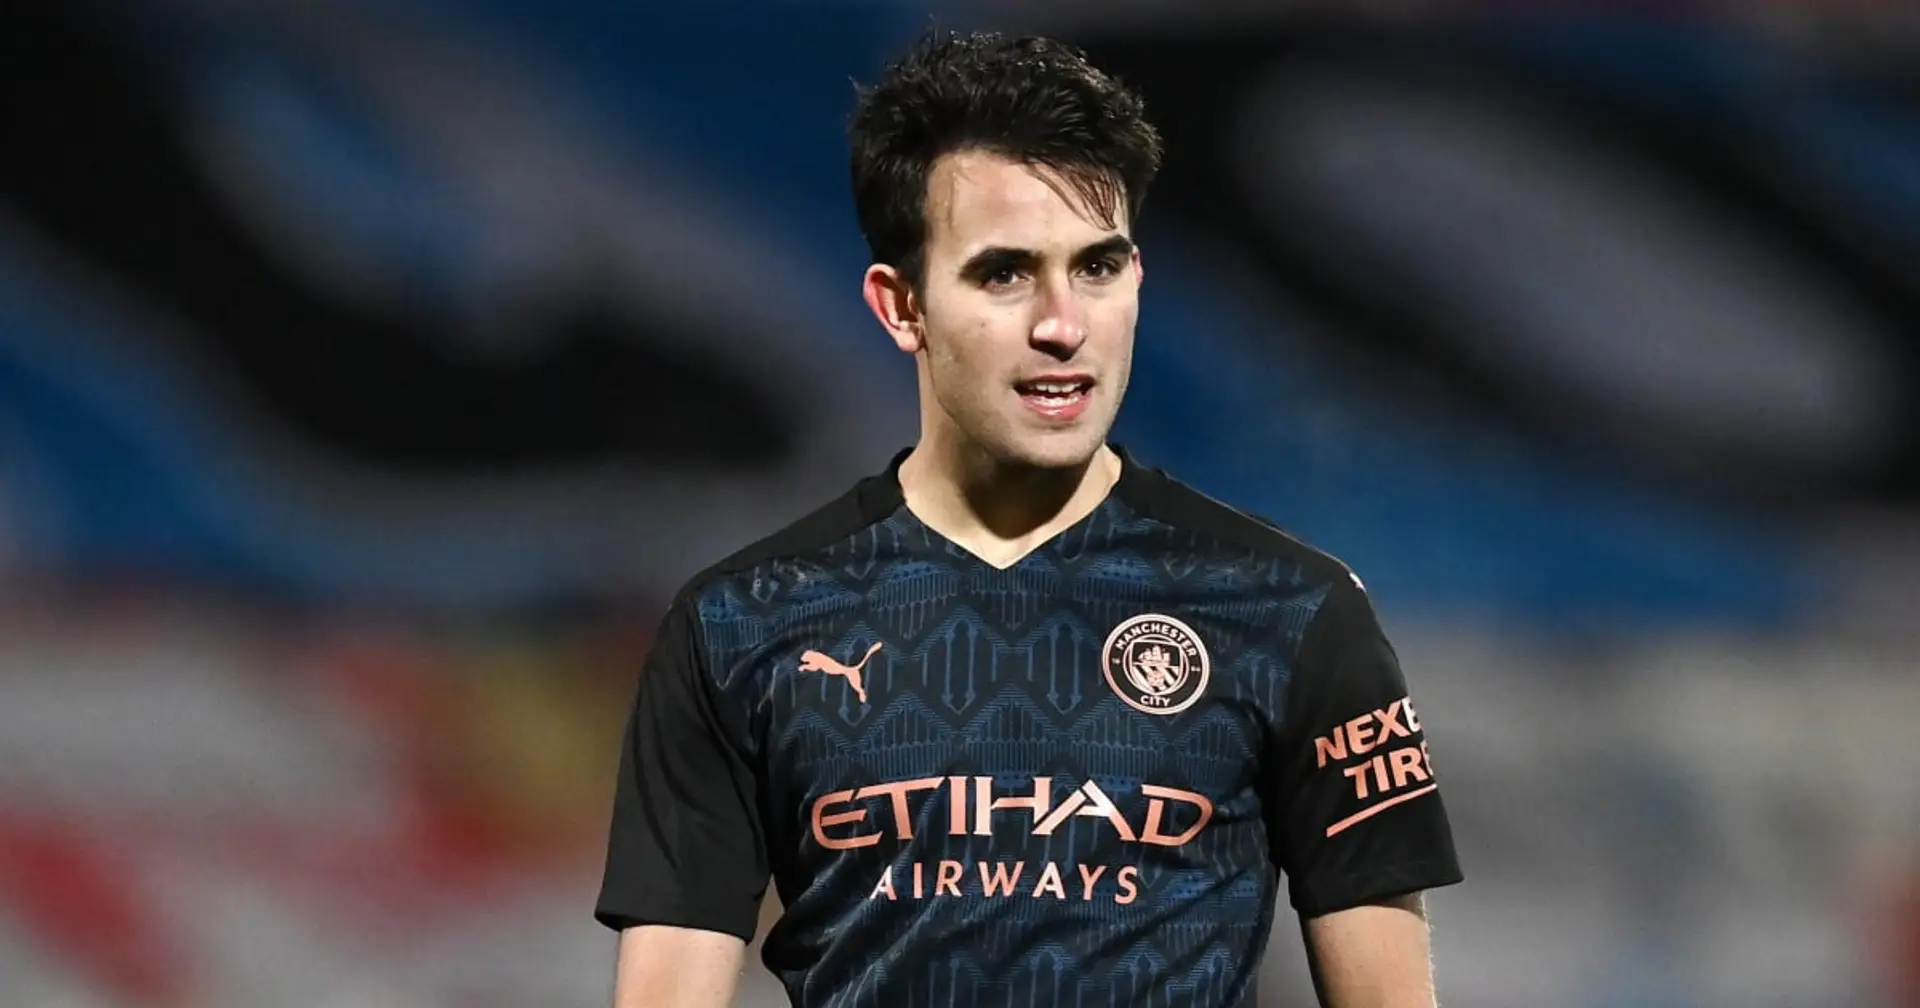 Barca offer Eric Garcia lesser wages to join than what was offered under Bartomeu (reliability: 4 stars)